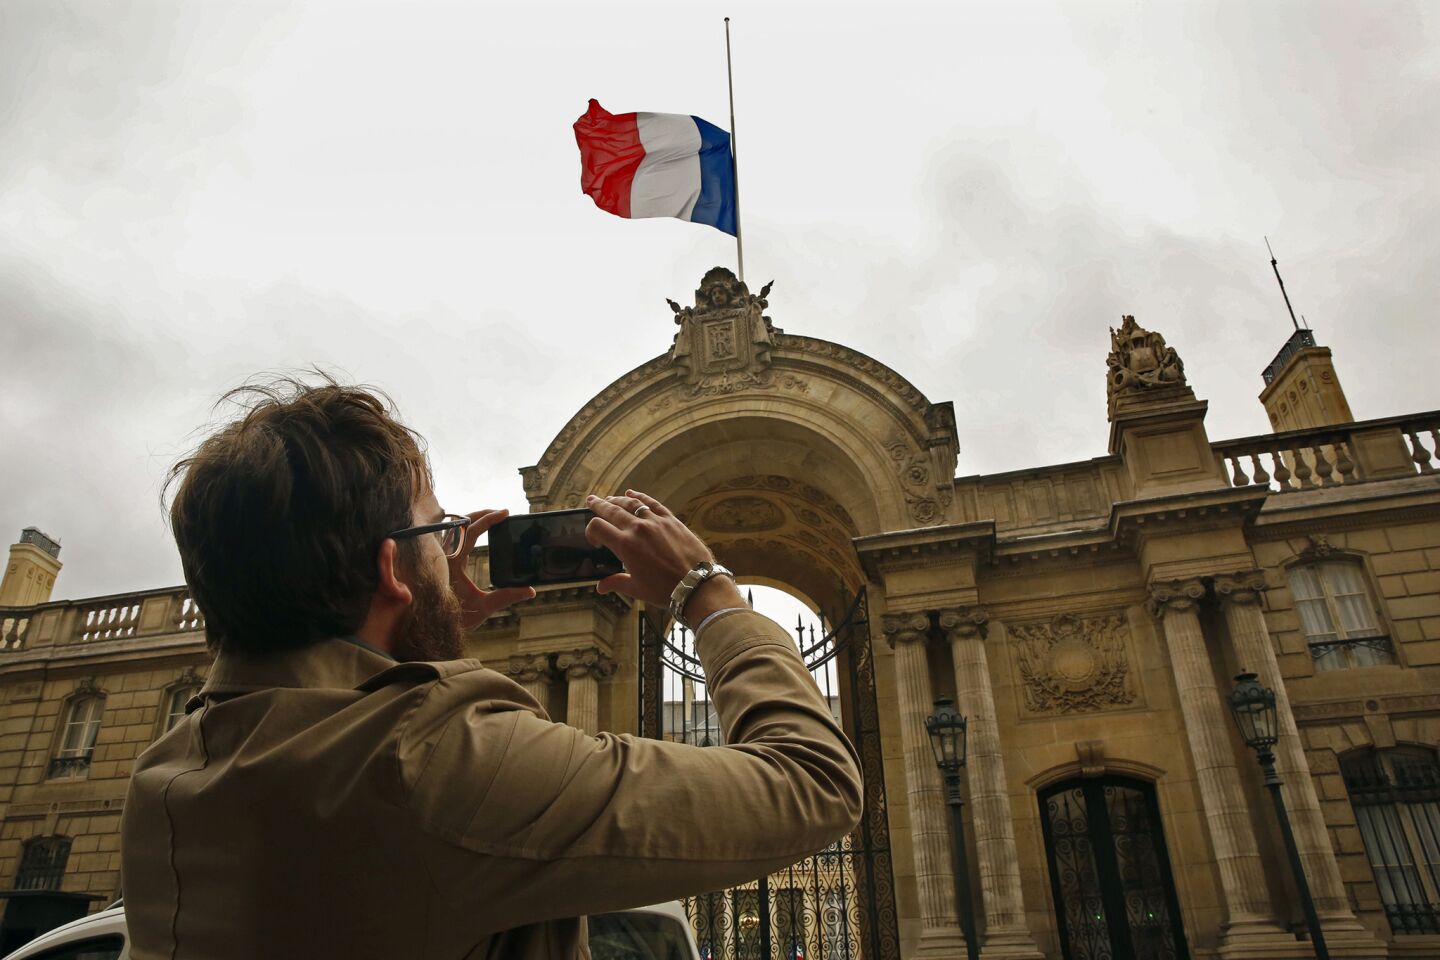 Sylvain Perriot stops to take a picture of the flag at half mast above the Presidential Palace in Paris. France's Sate of Emergency will continue, with flags at half mast.